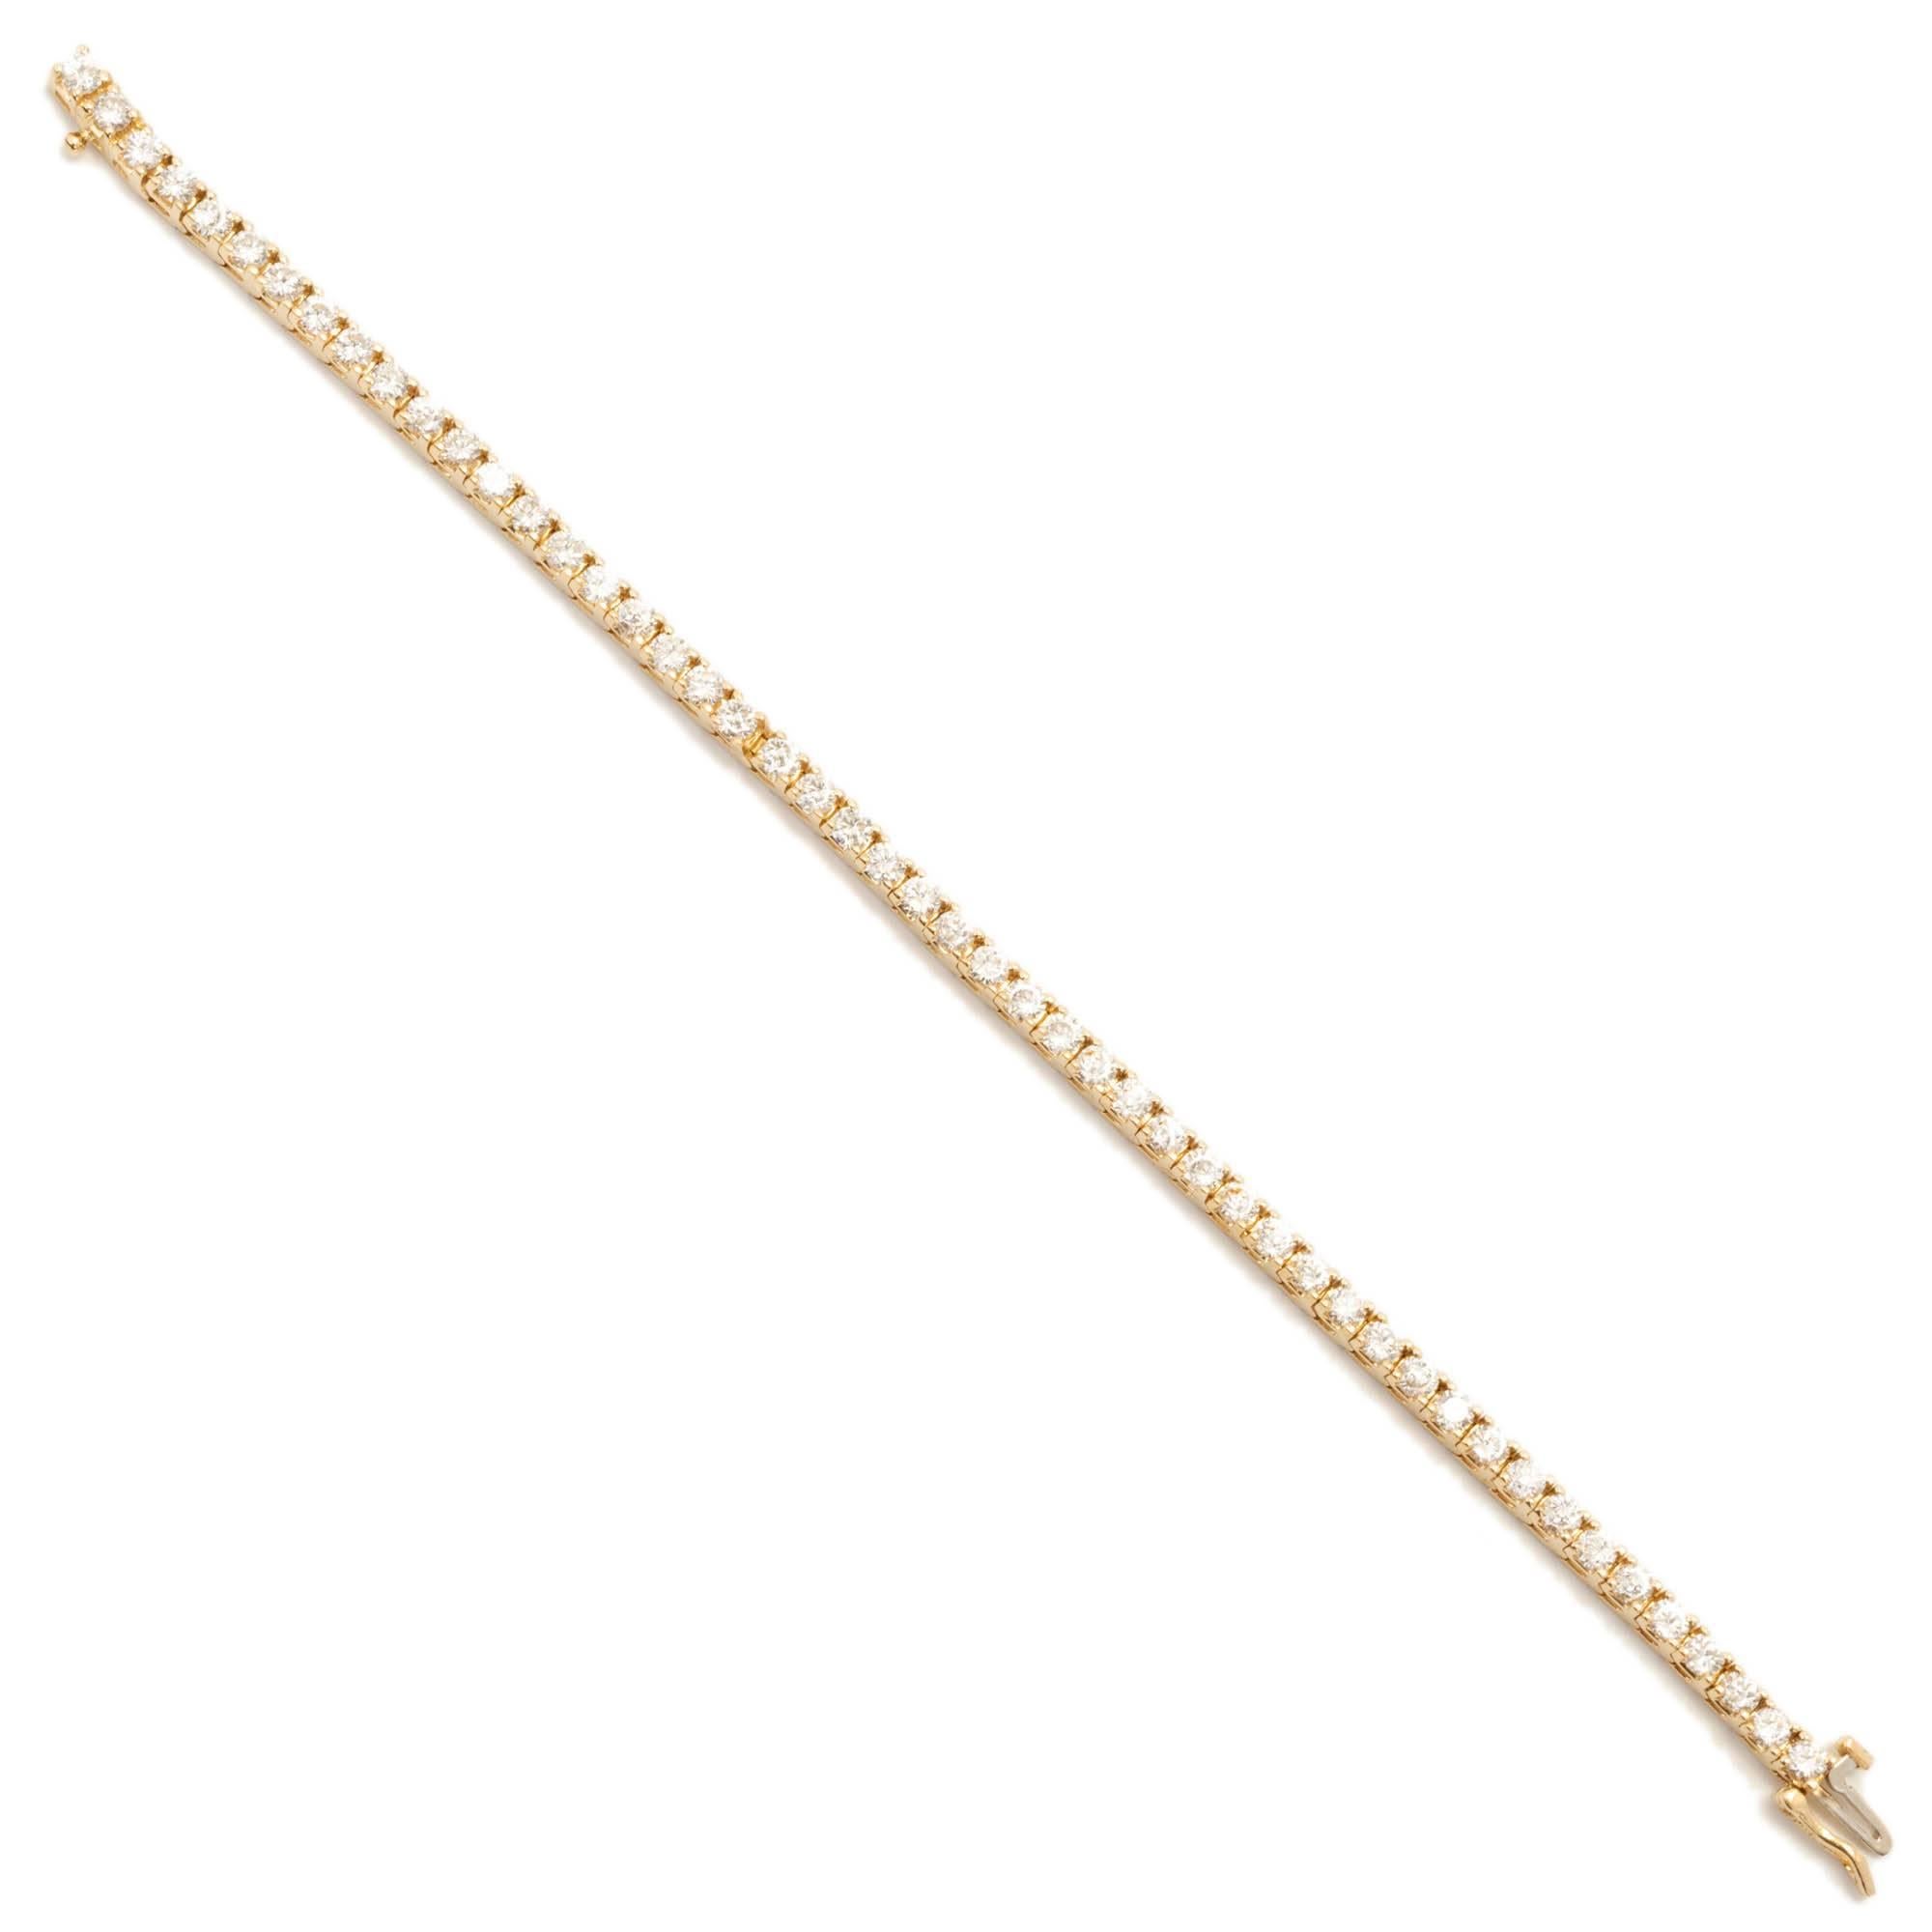 Classic solid 14k yellow gold hinged link Italian made diamond tennis bracelet with 50 bright full cut diamonds. Built in catch with side lock safety.

50 round I SI diamond 3mm Approximate 5.00 carats
14k Yellow Gold
Tested: 14k
Stamped: 14k